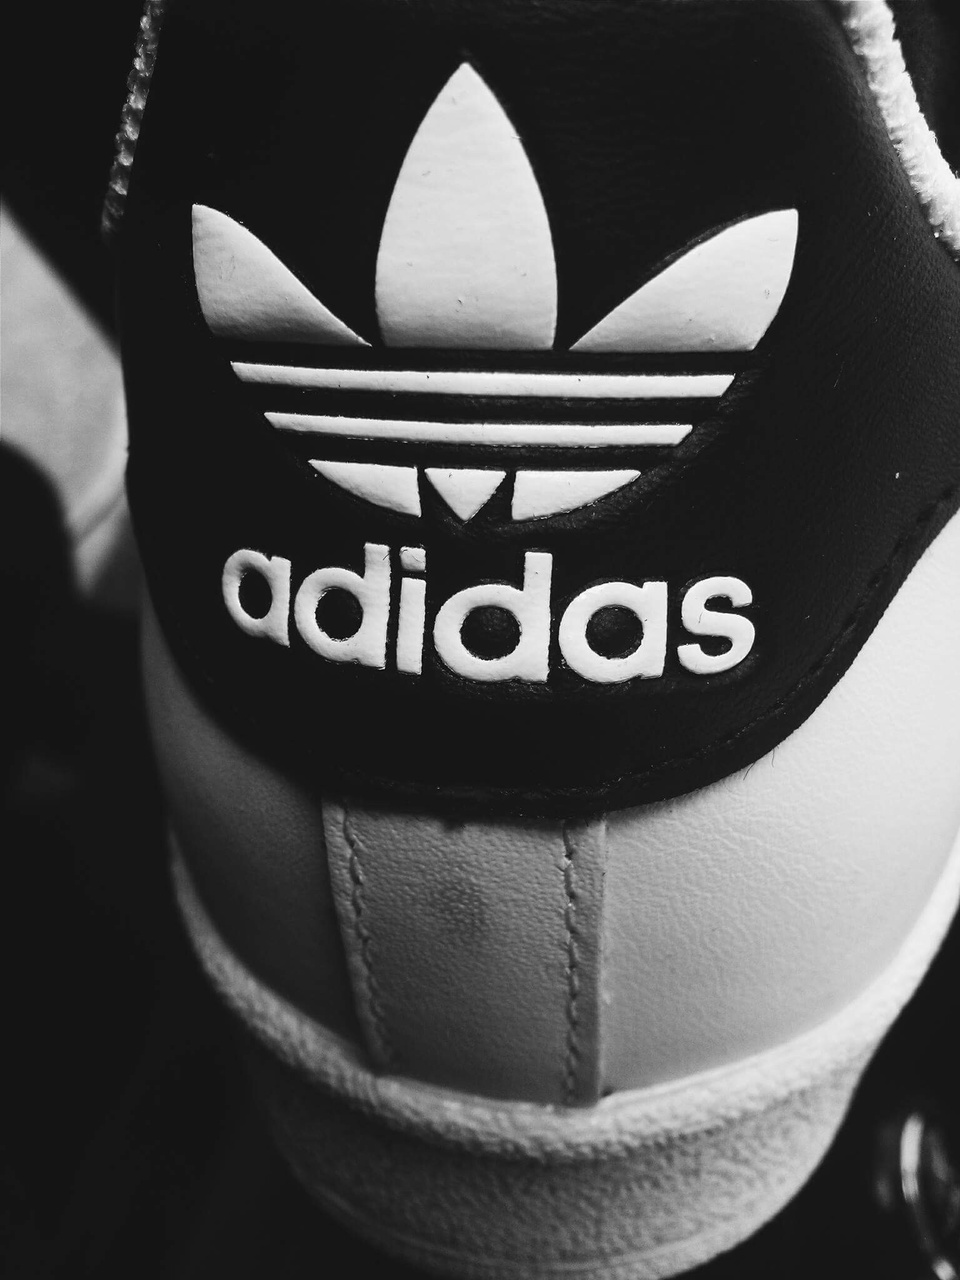 Adidas, Wallpaper, And Background Image - M And M Direct - HD Wallpaper 